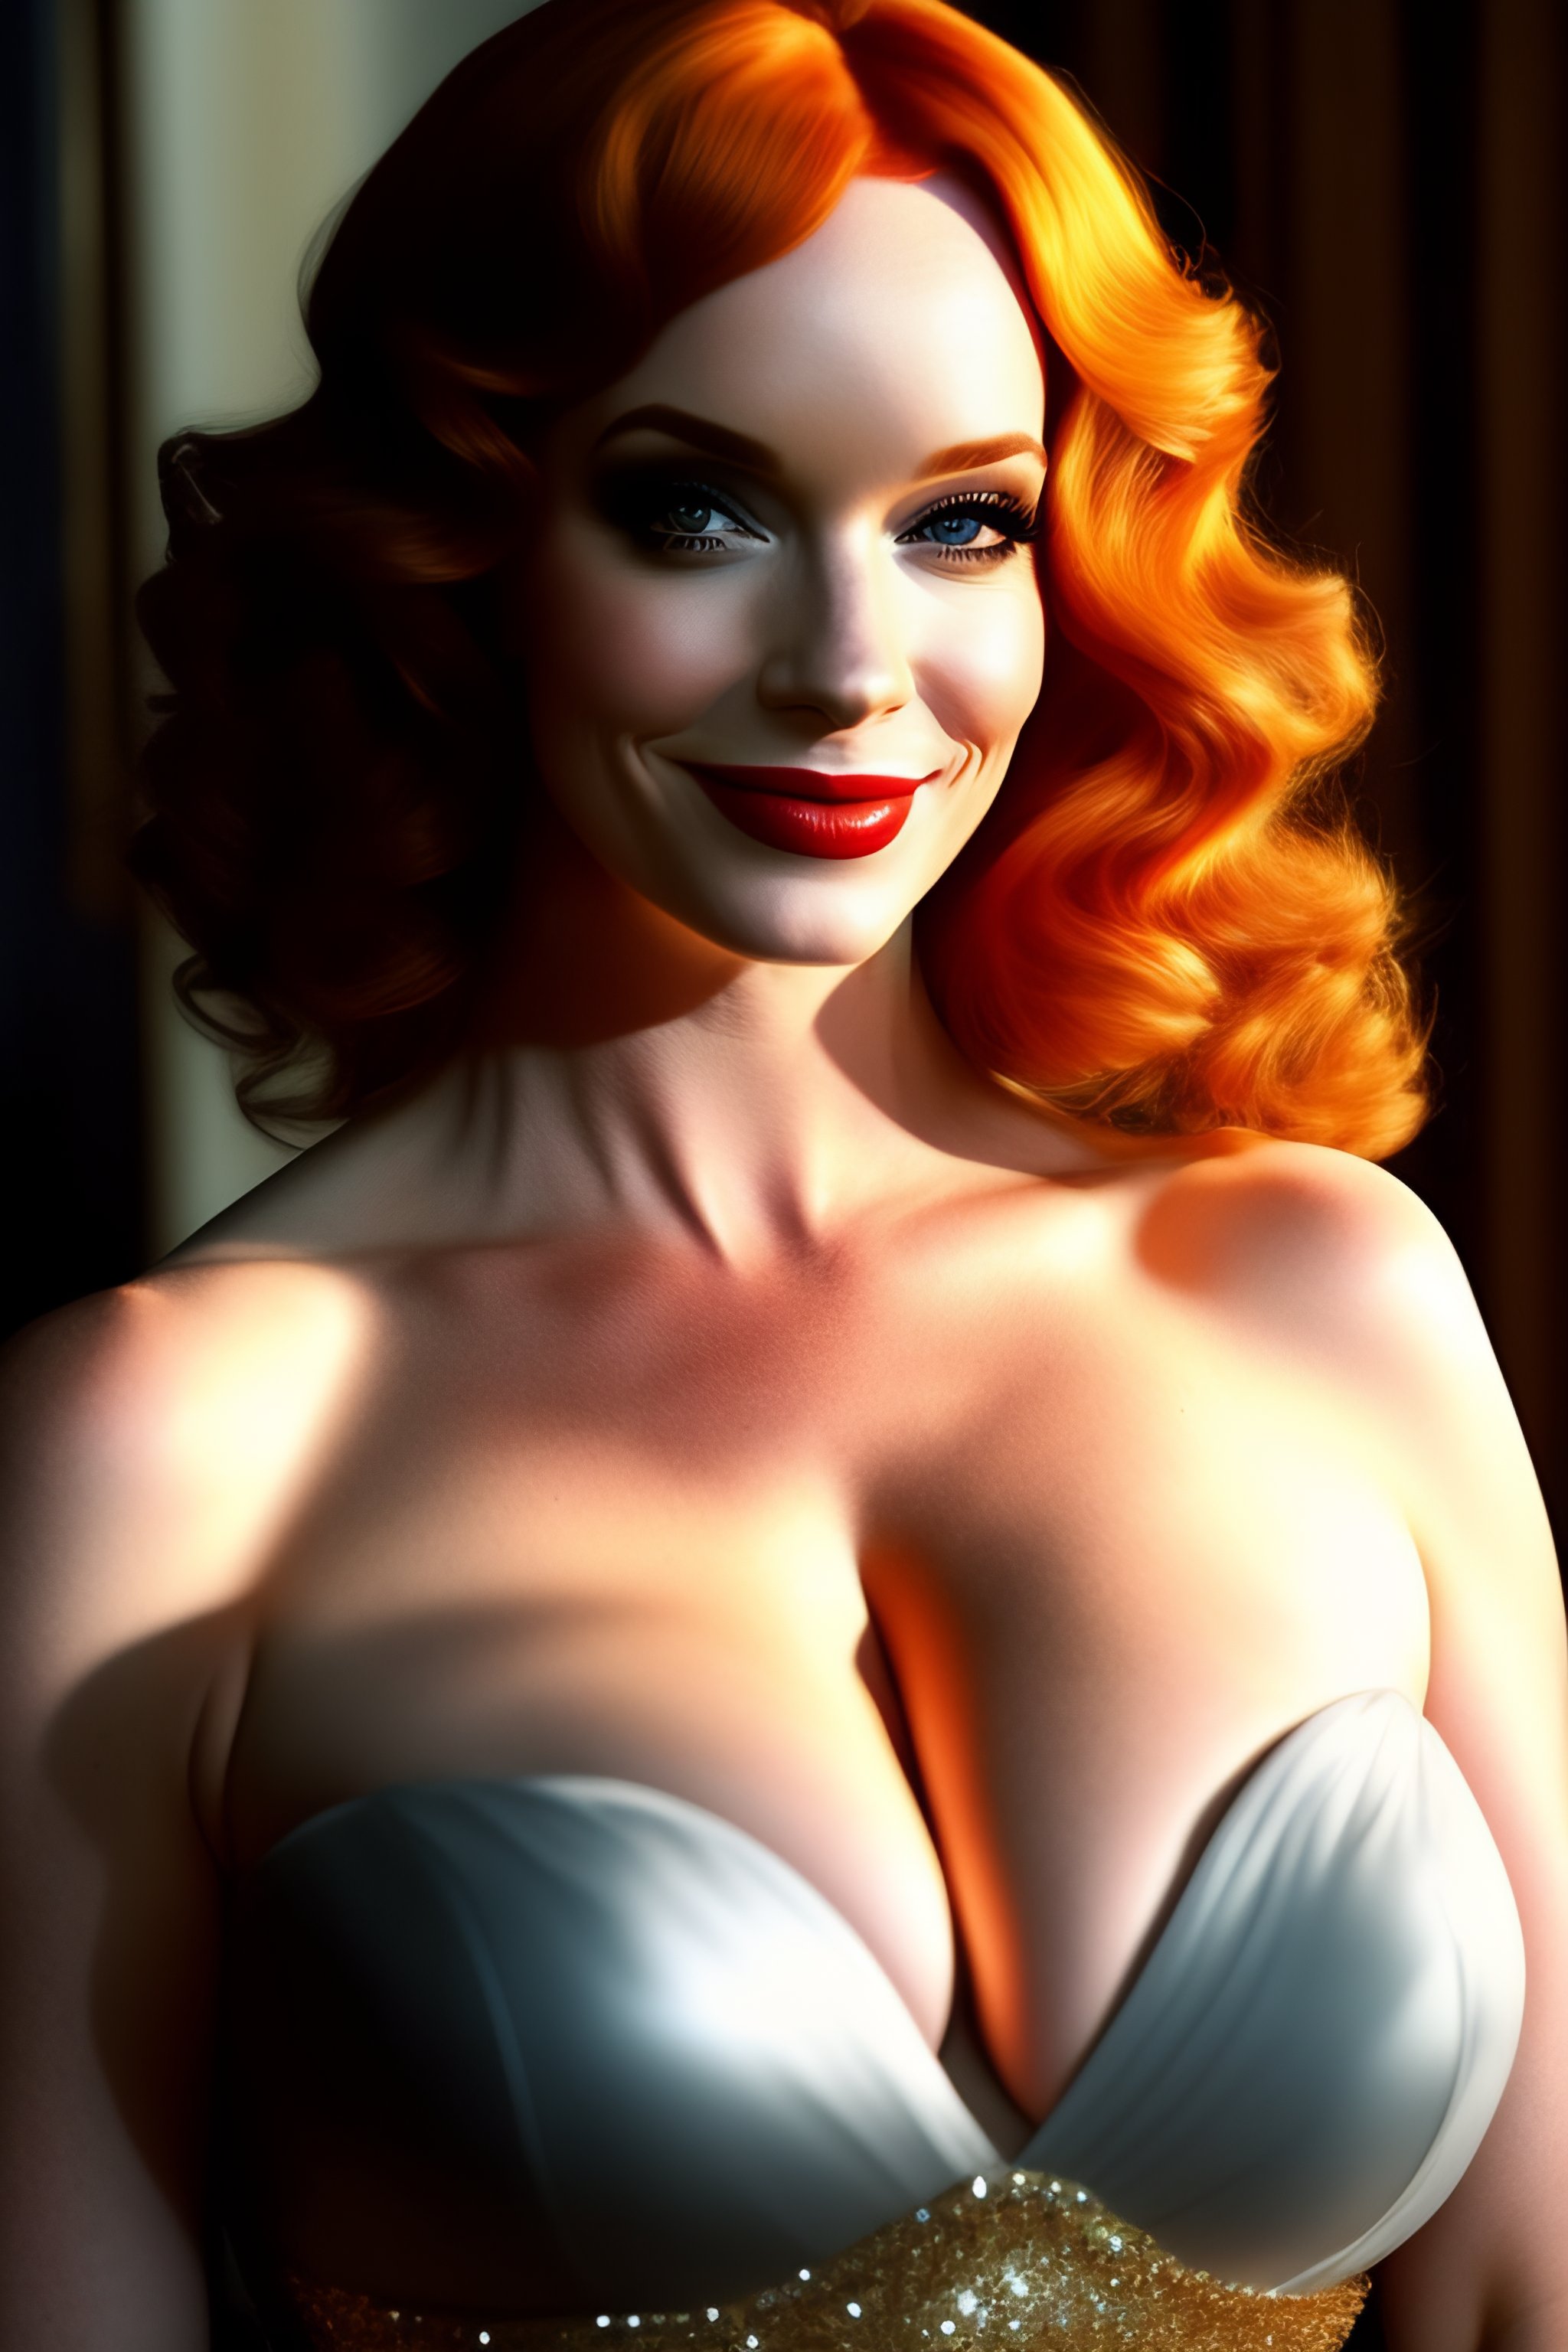 alex leroy recommends christina hendricks sexy pictures pic